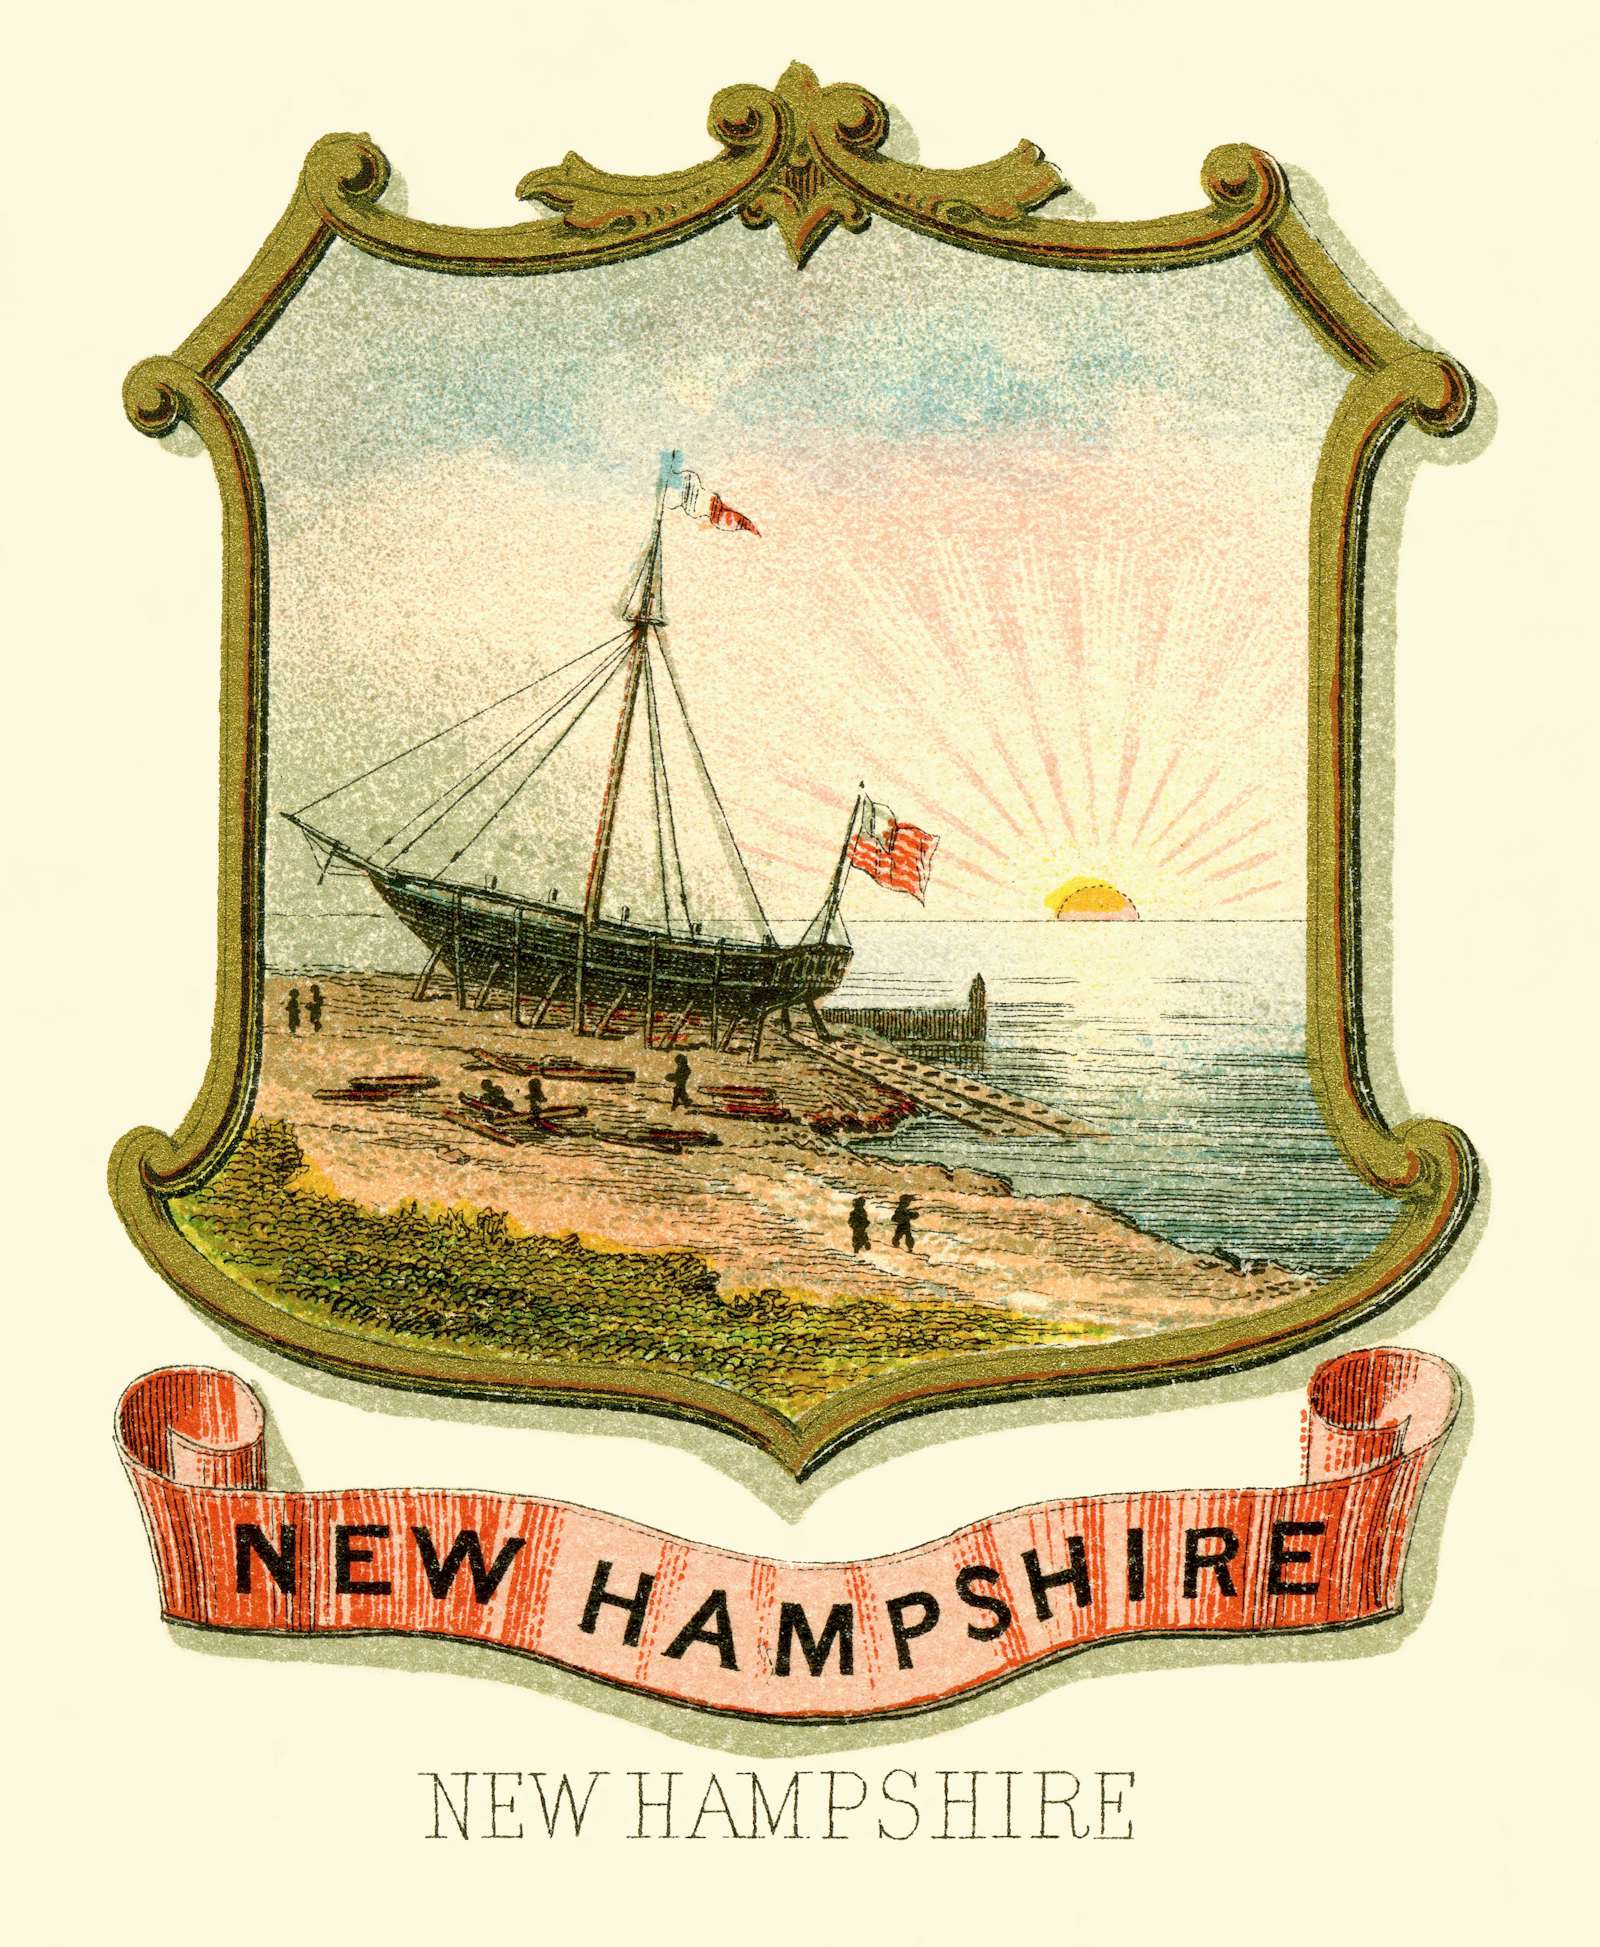 New Hampshire State Coat of Arms